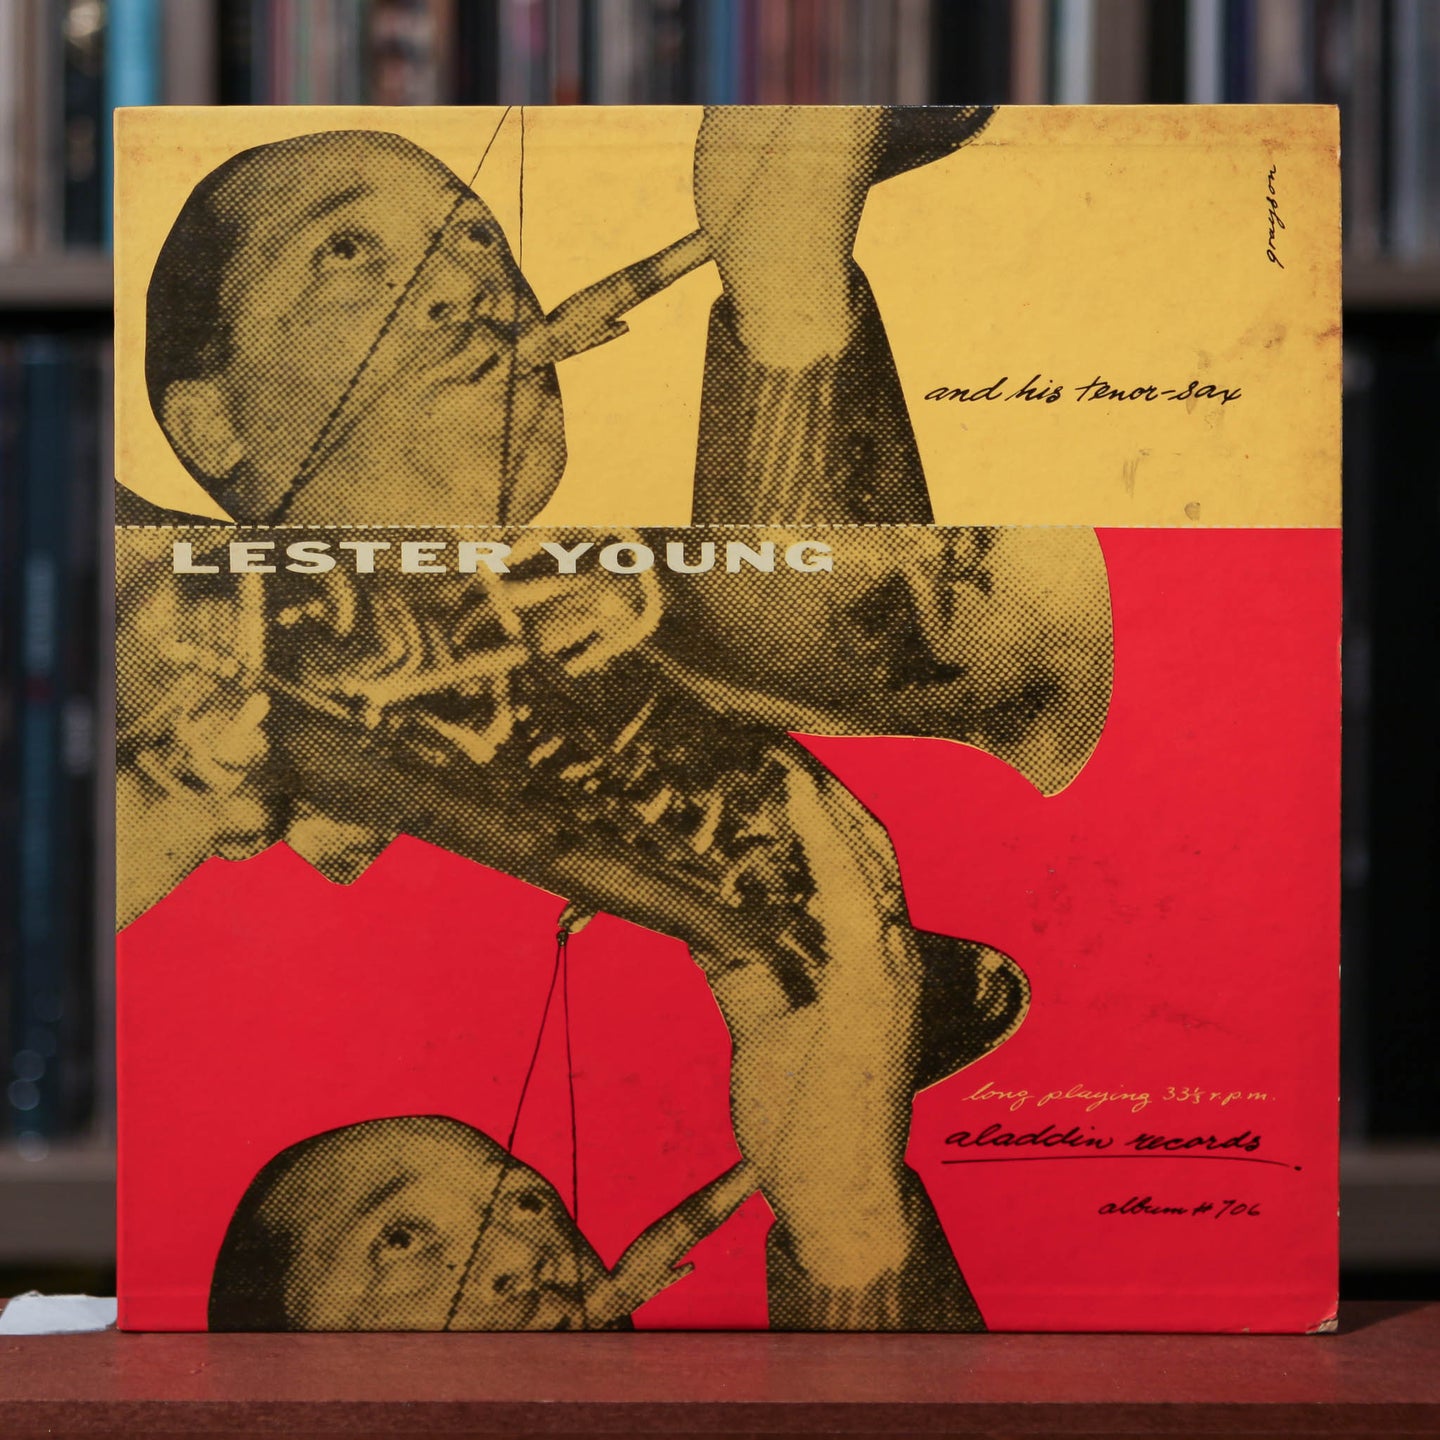 Lester Young - And His Tenor Sax - 10